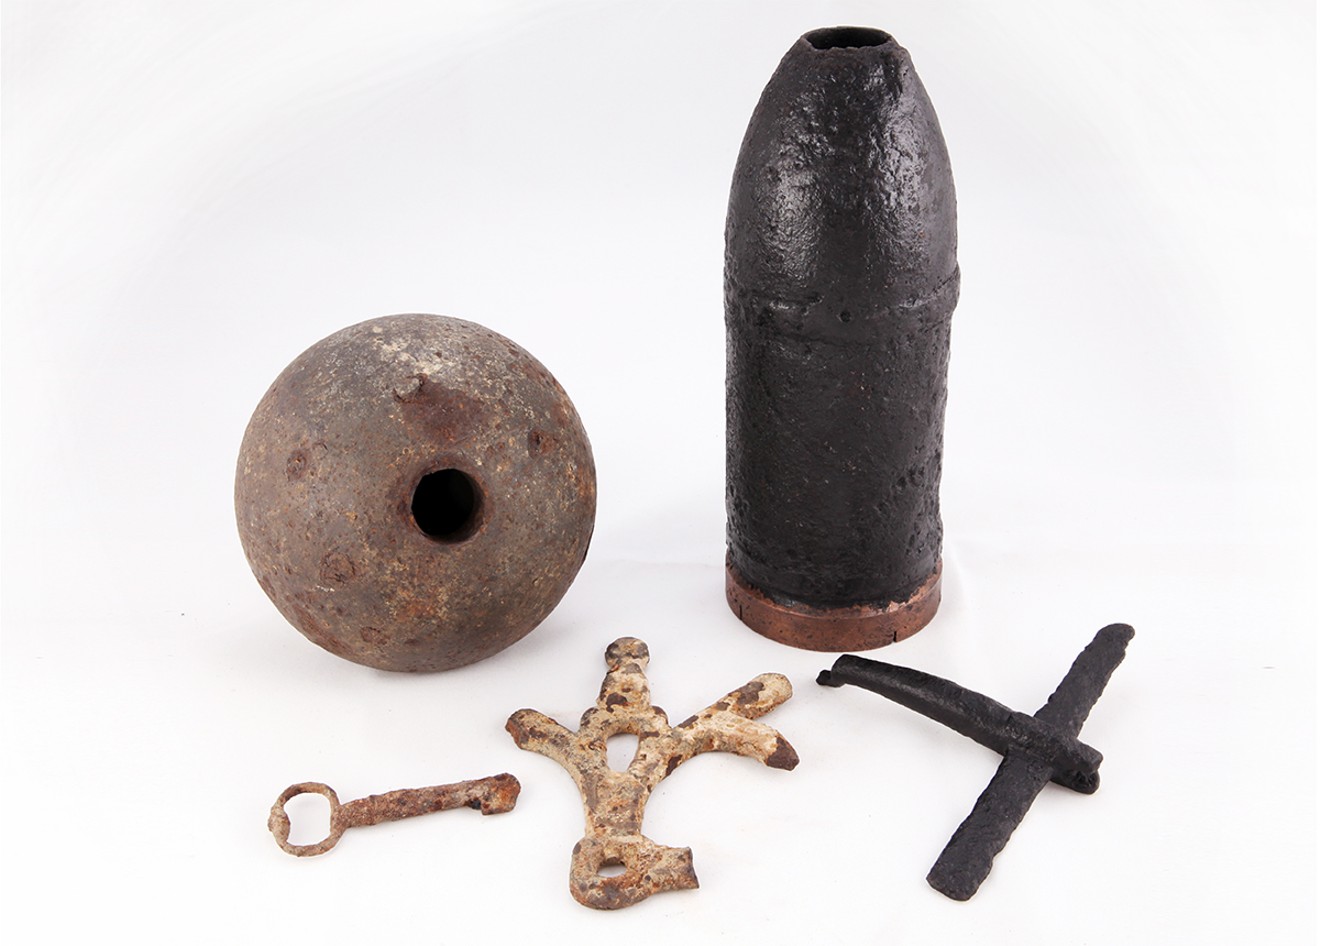 A new exhibit at The Heritage Society, "Dumped and Forgotten Below the Milam Street Bridge," explores Houston's role in the Civil War through munitions, artifacts and history.